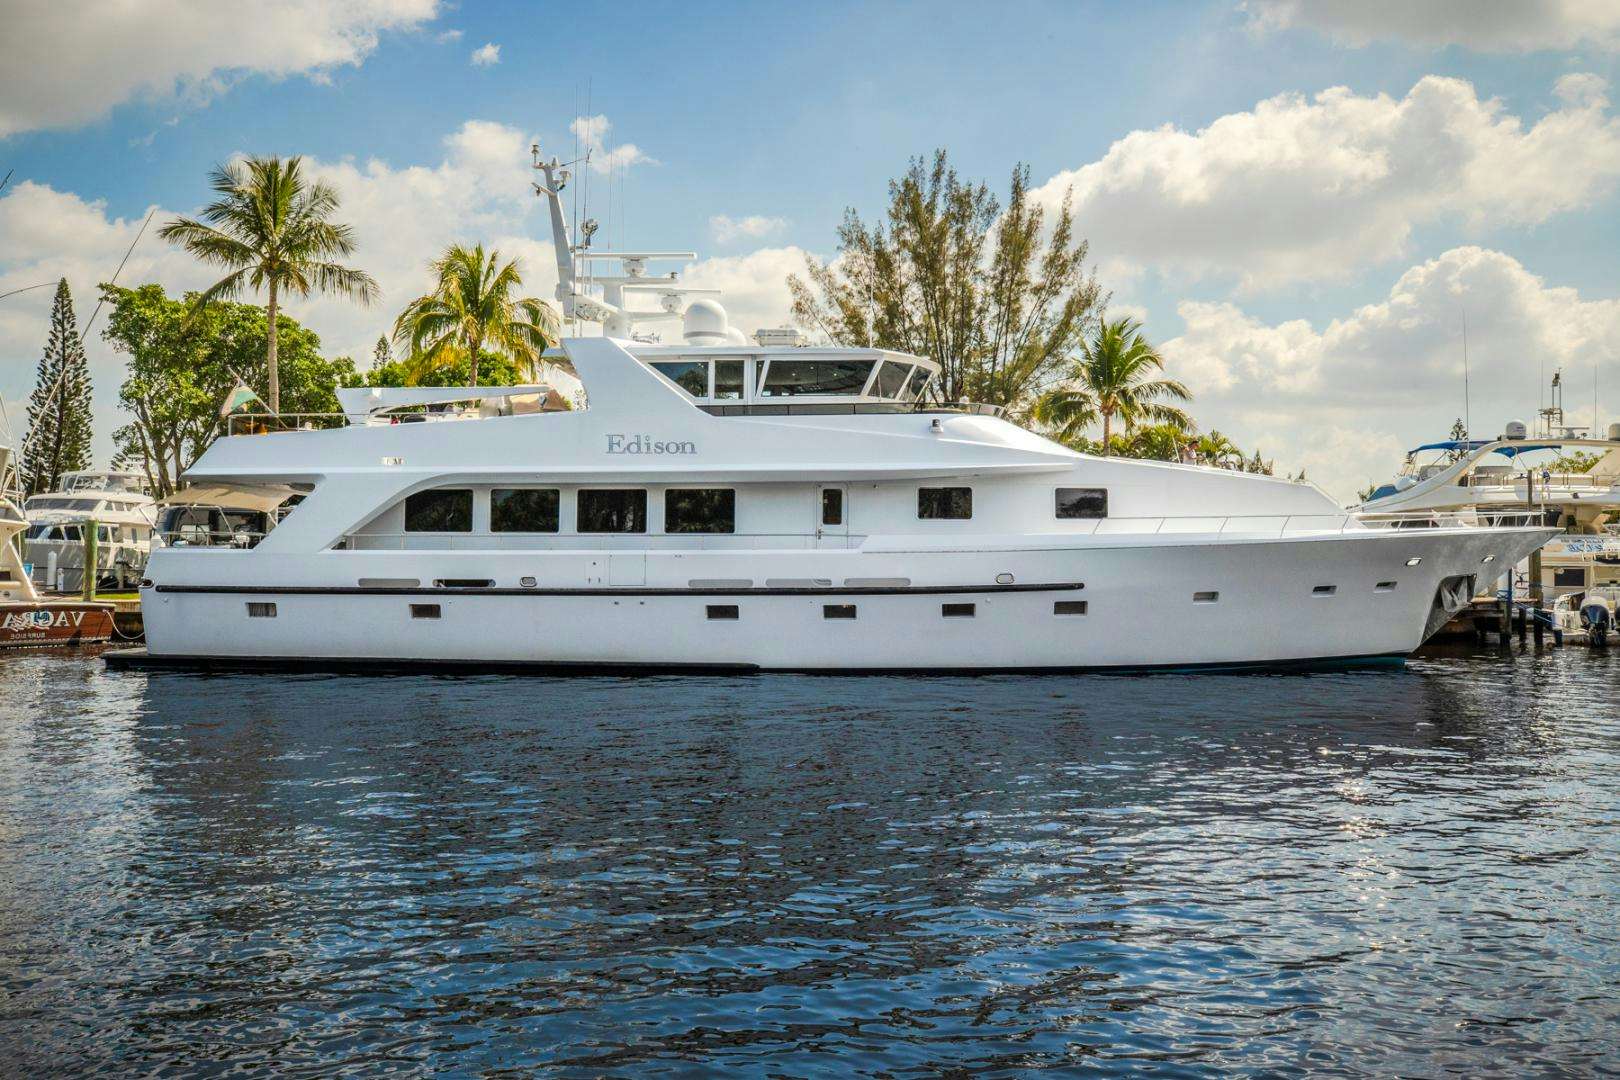 Watch Video for EDISON Yacht for Sale